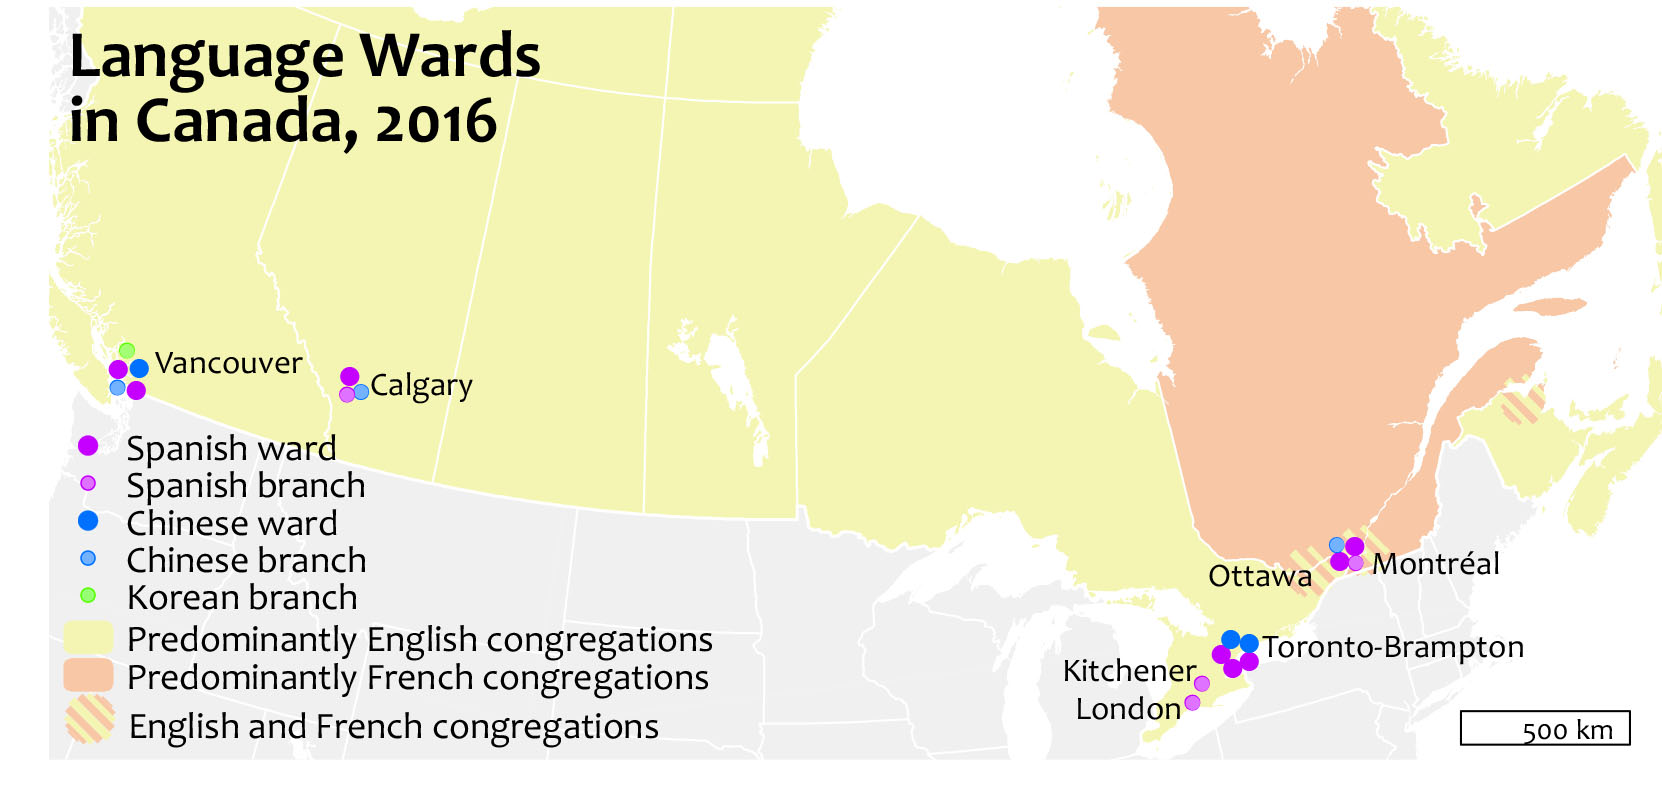 map of language wards in Canada in 2016